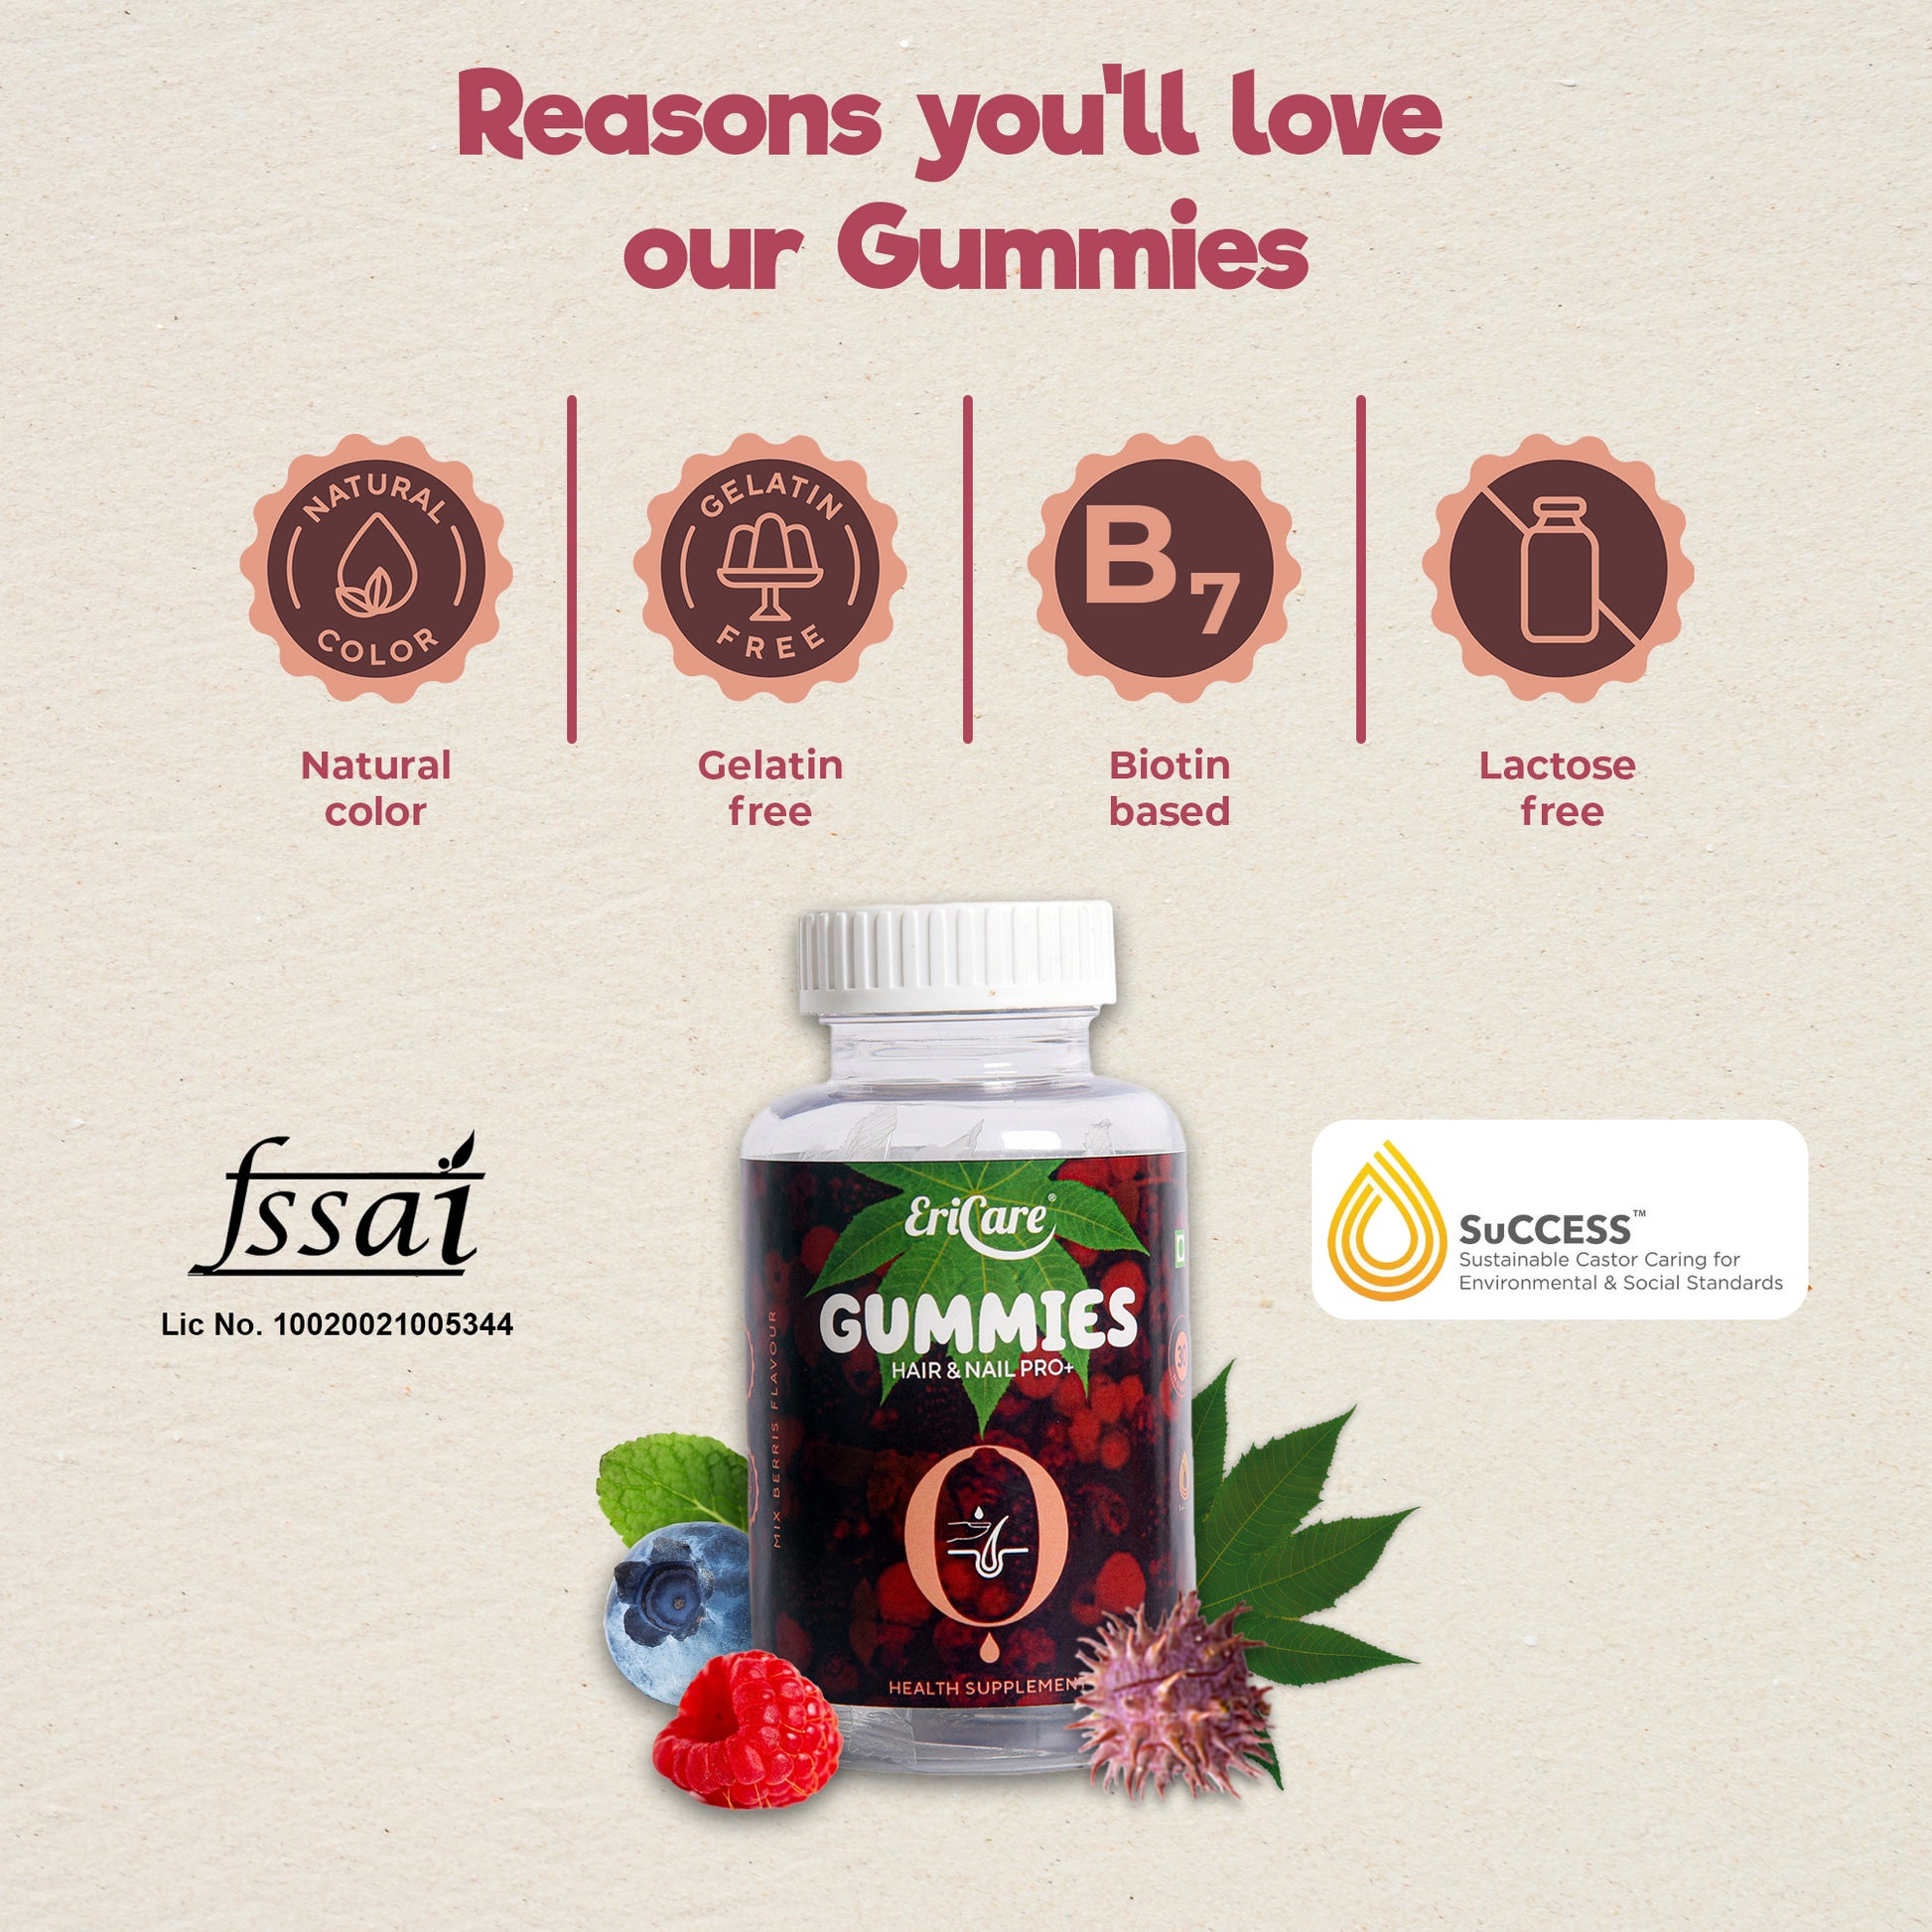 Our castor oil Gummies are unique and you will love it for its natural colour, biotin, gelatin free and lactose free